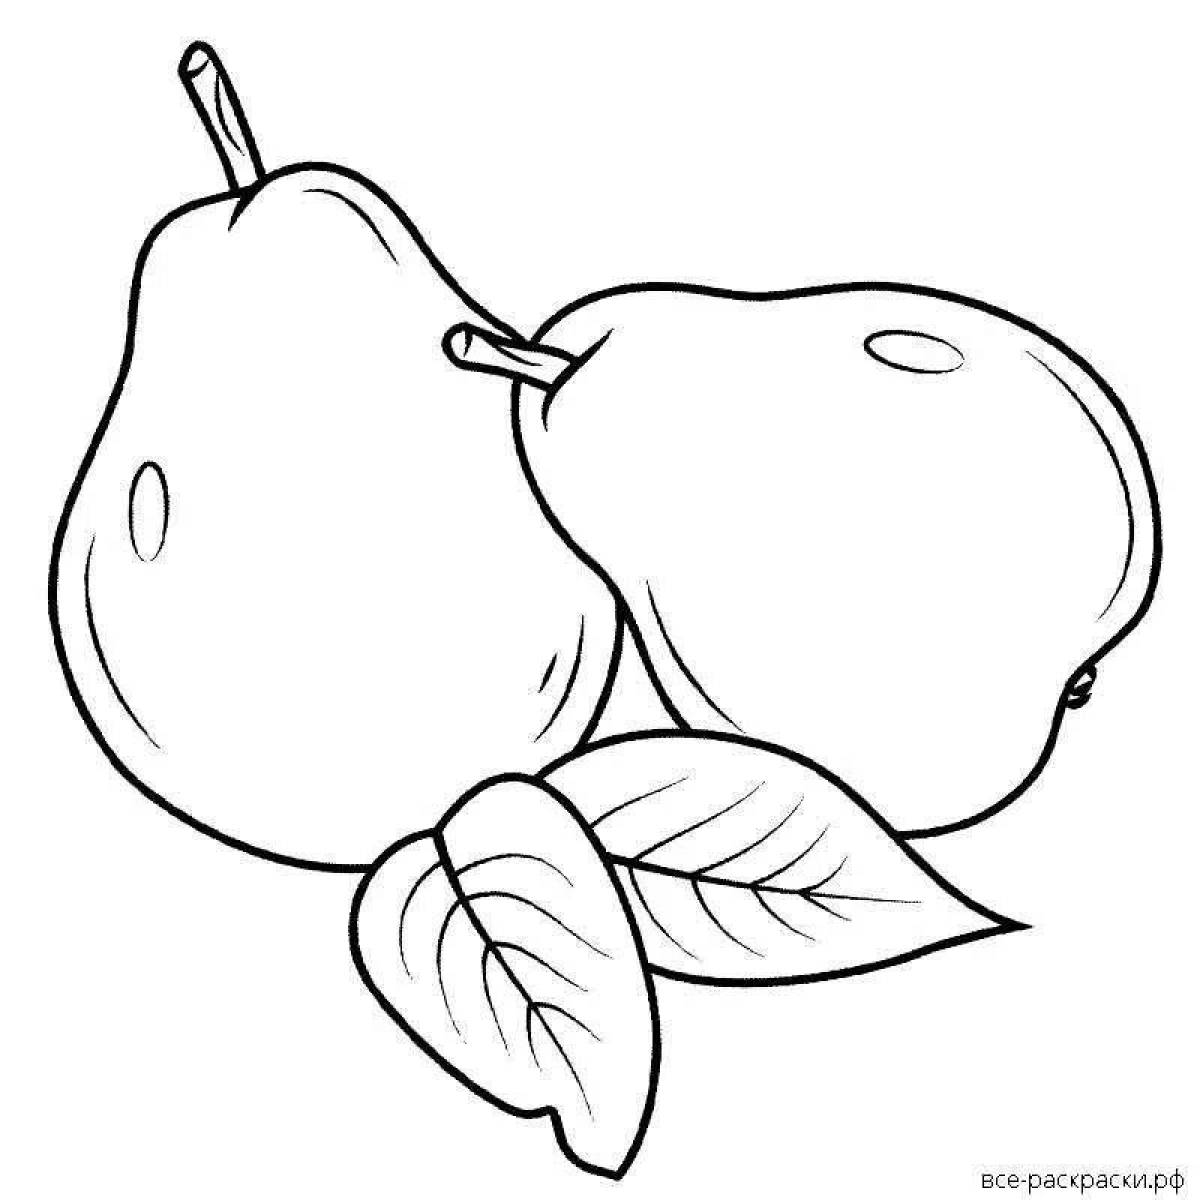 Gorgeous apple and pear coloring book